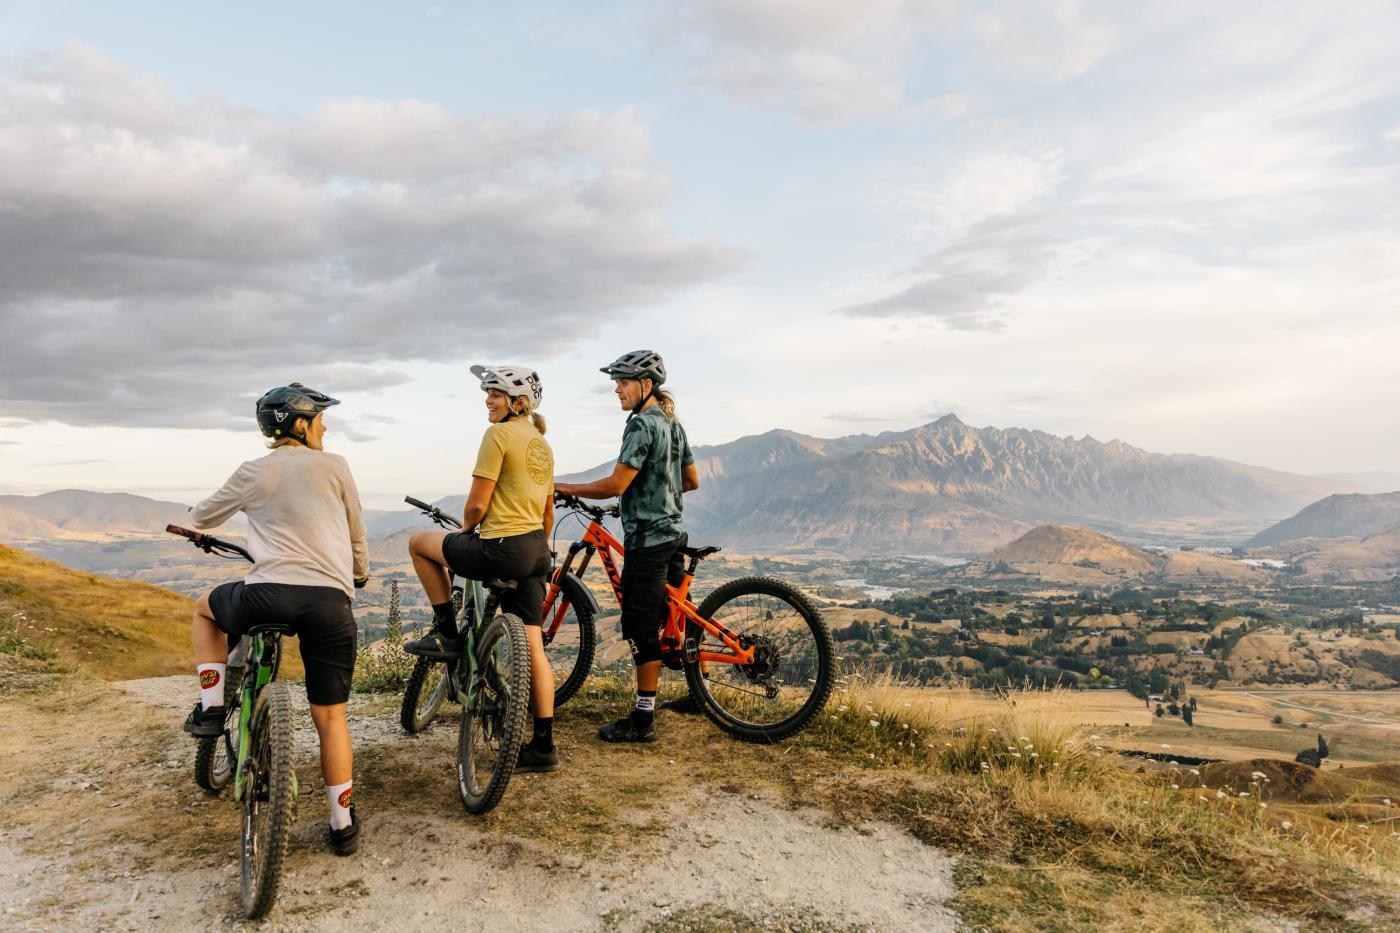 Three mountain bikers at the top of a mountain overlooking a valley with the Remarkables mountains in the background